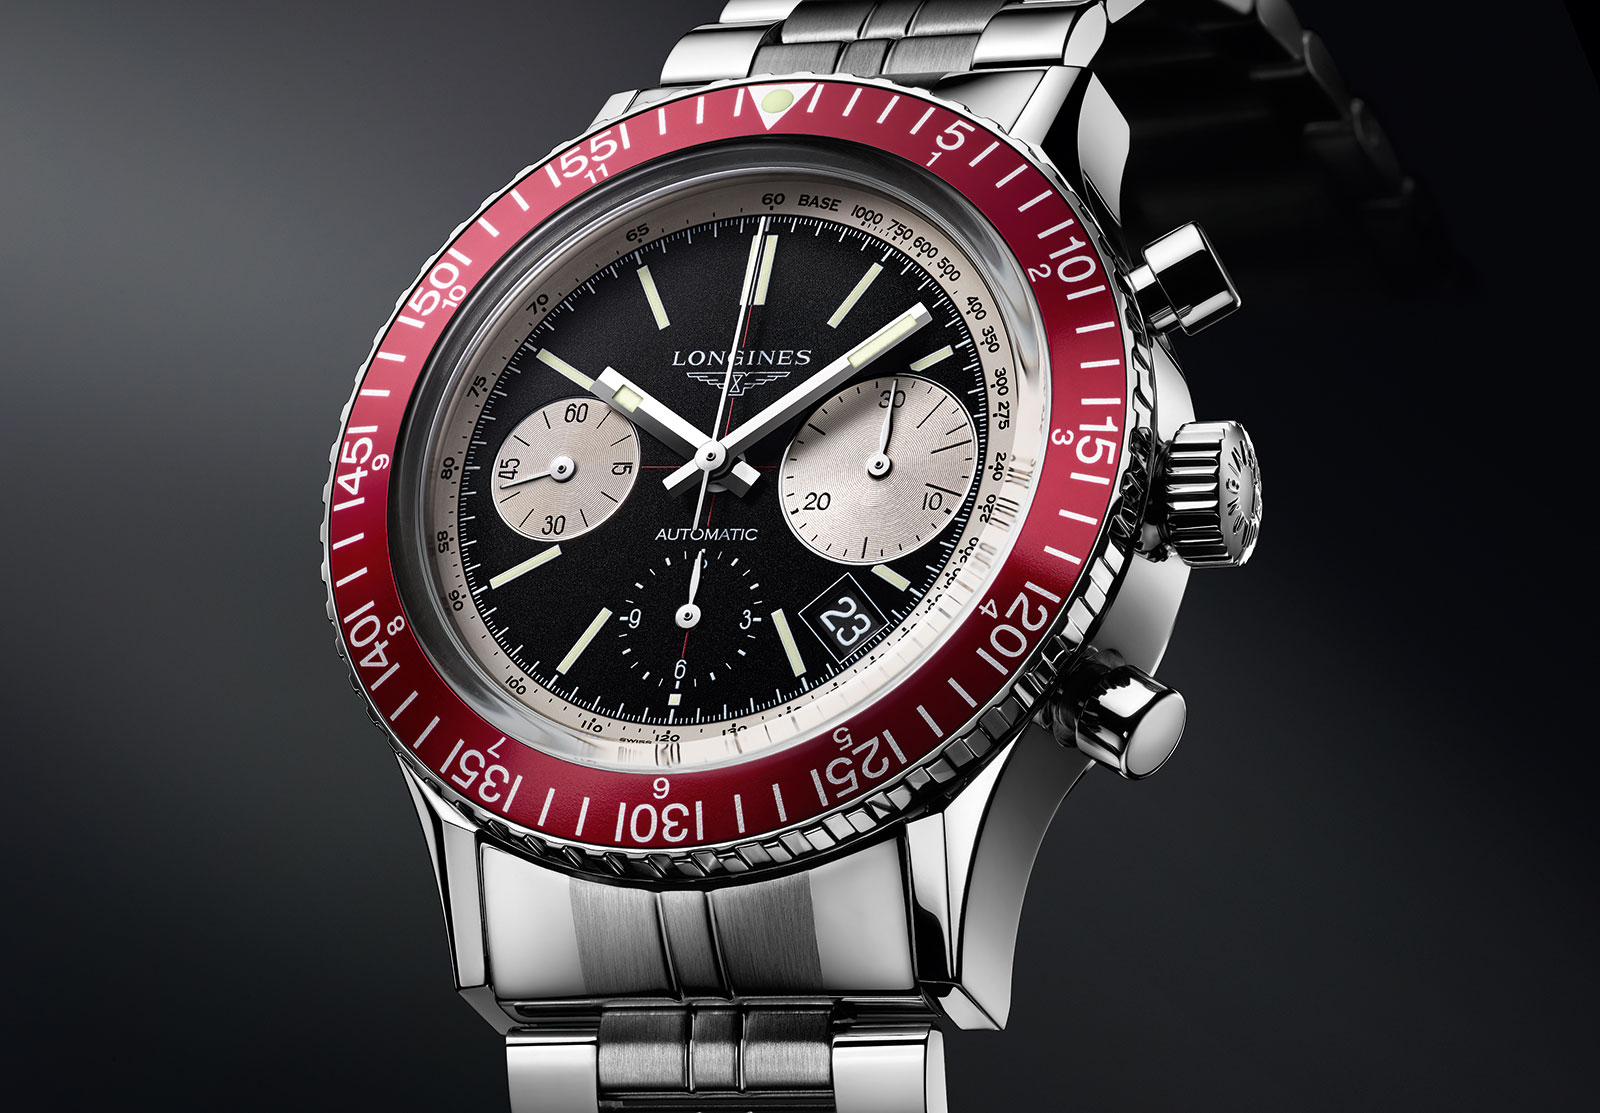 Longines Unveils The Heritage Diver 1967 – A Remake Of The Sixties “Skin- Diver” Chronograph (With Official Pricing) | SJX Watches